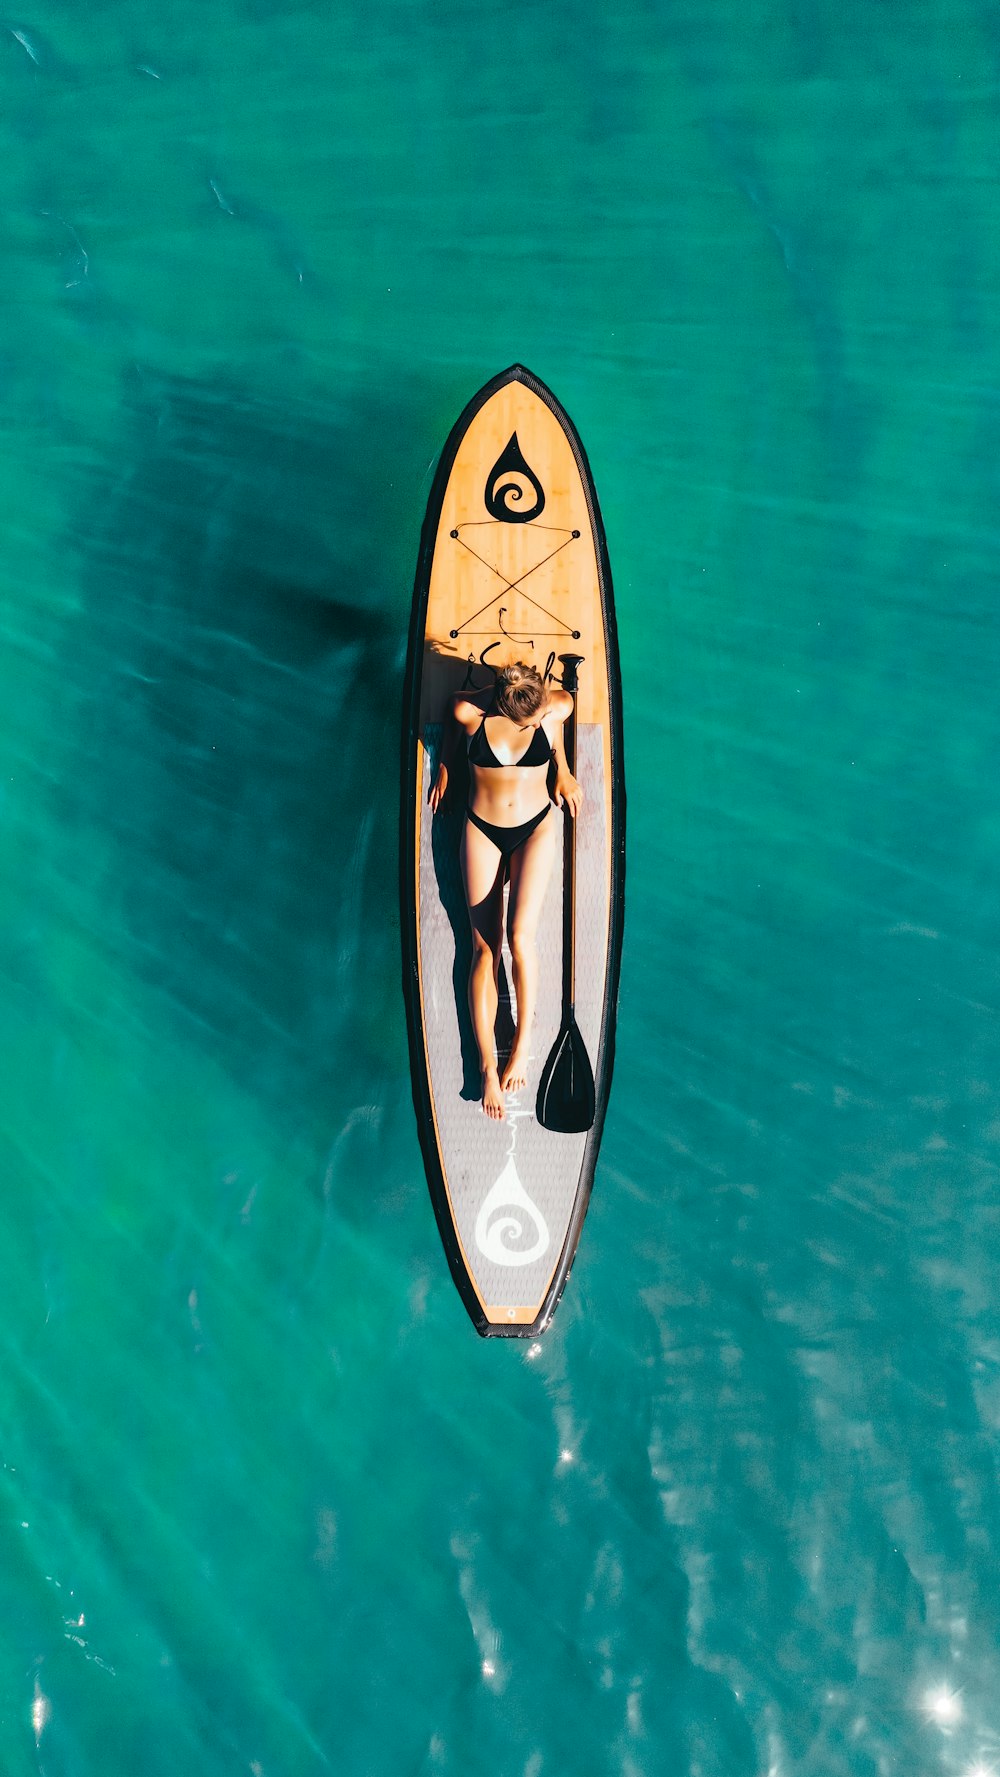 white and black surfboard on body of water